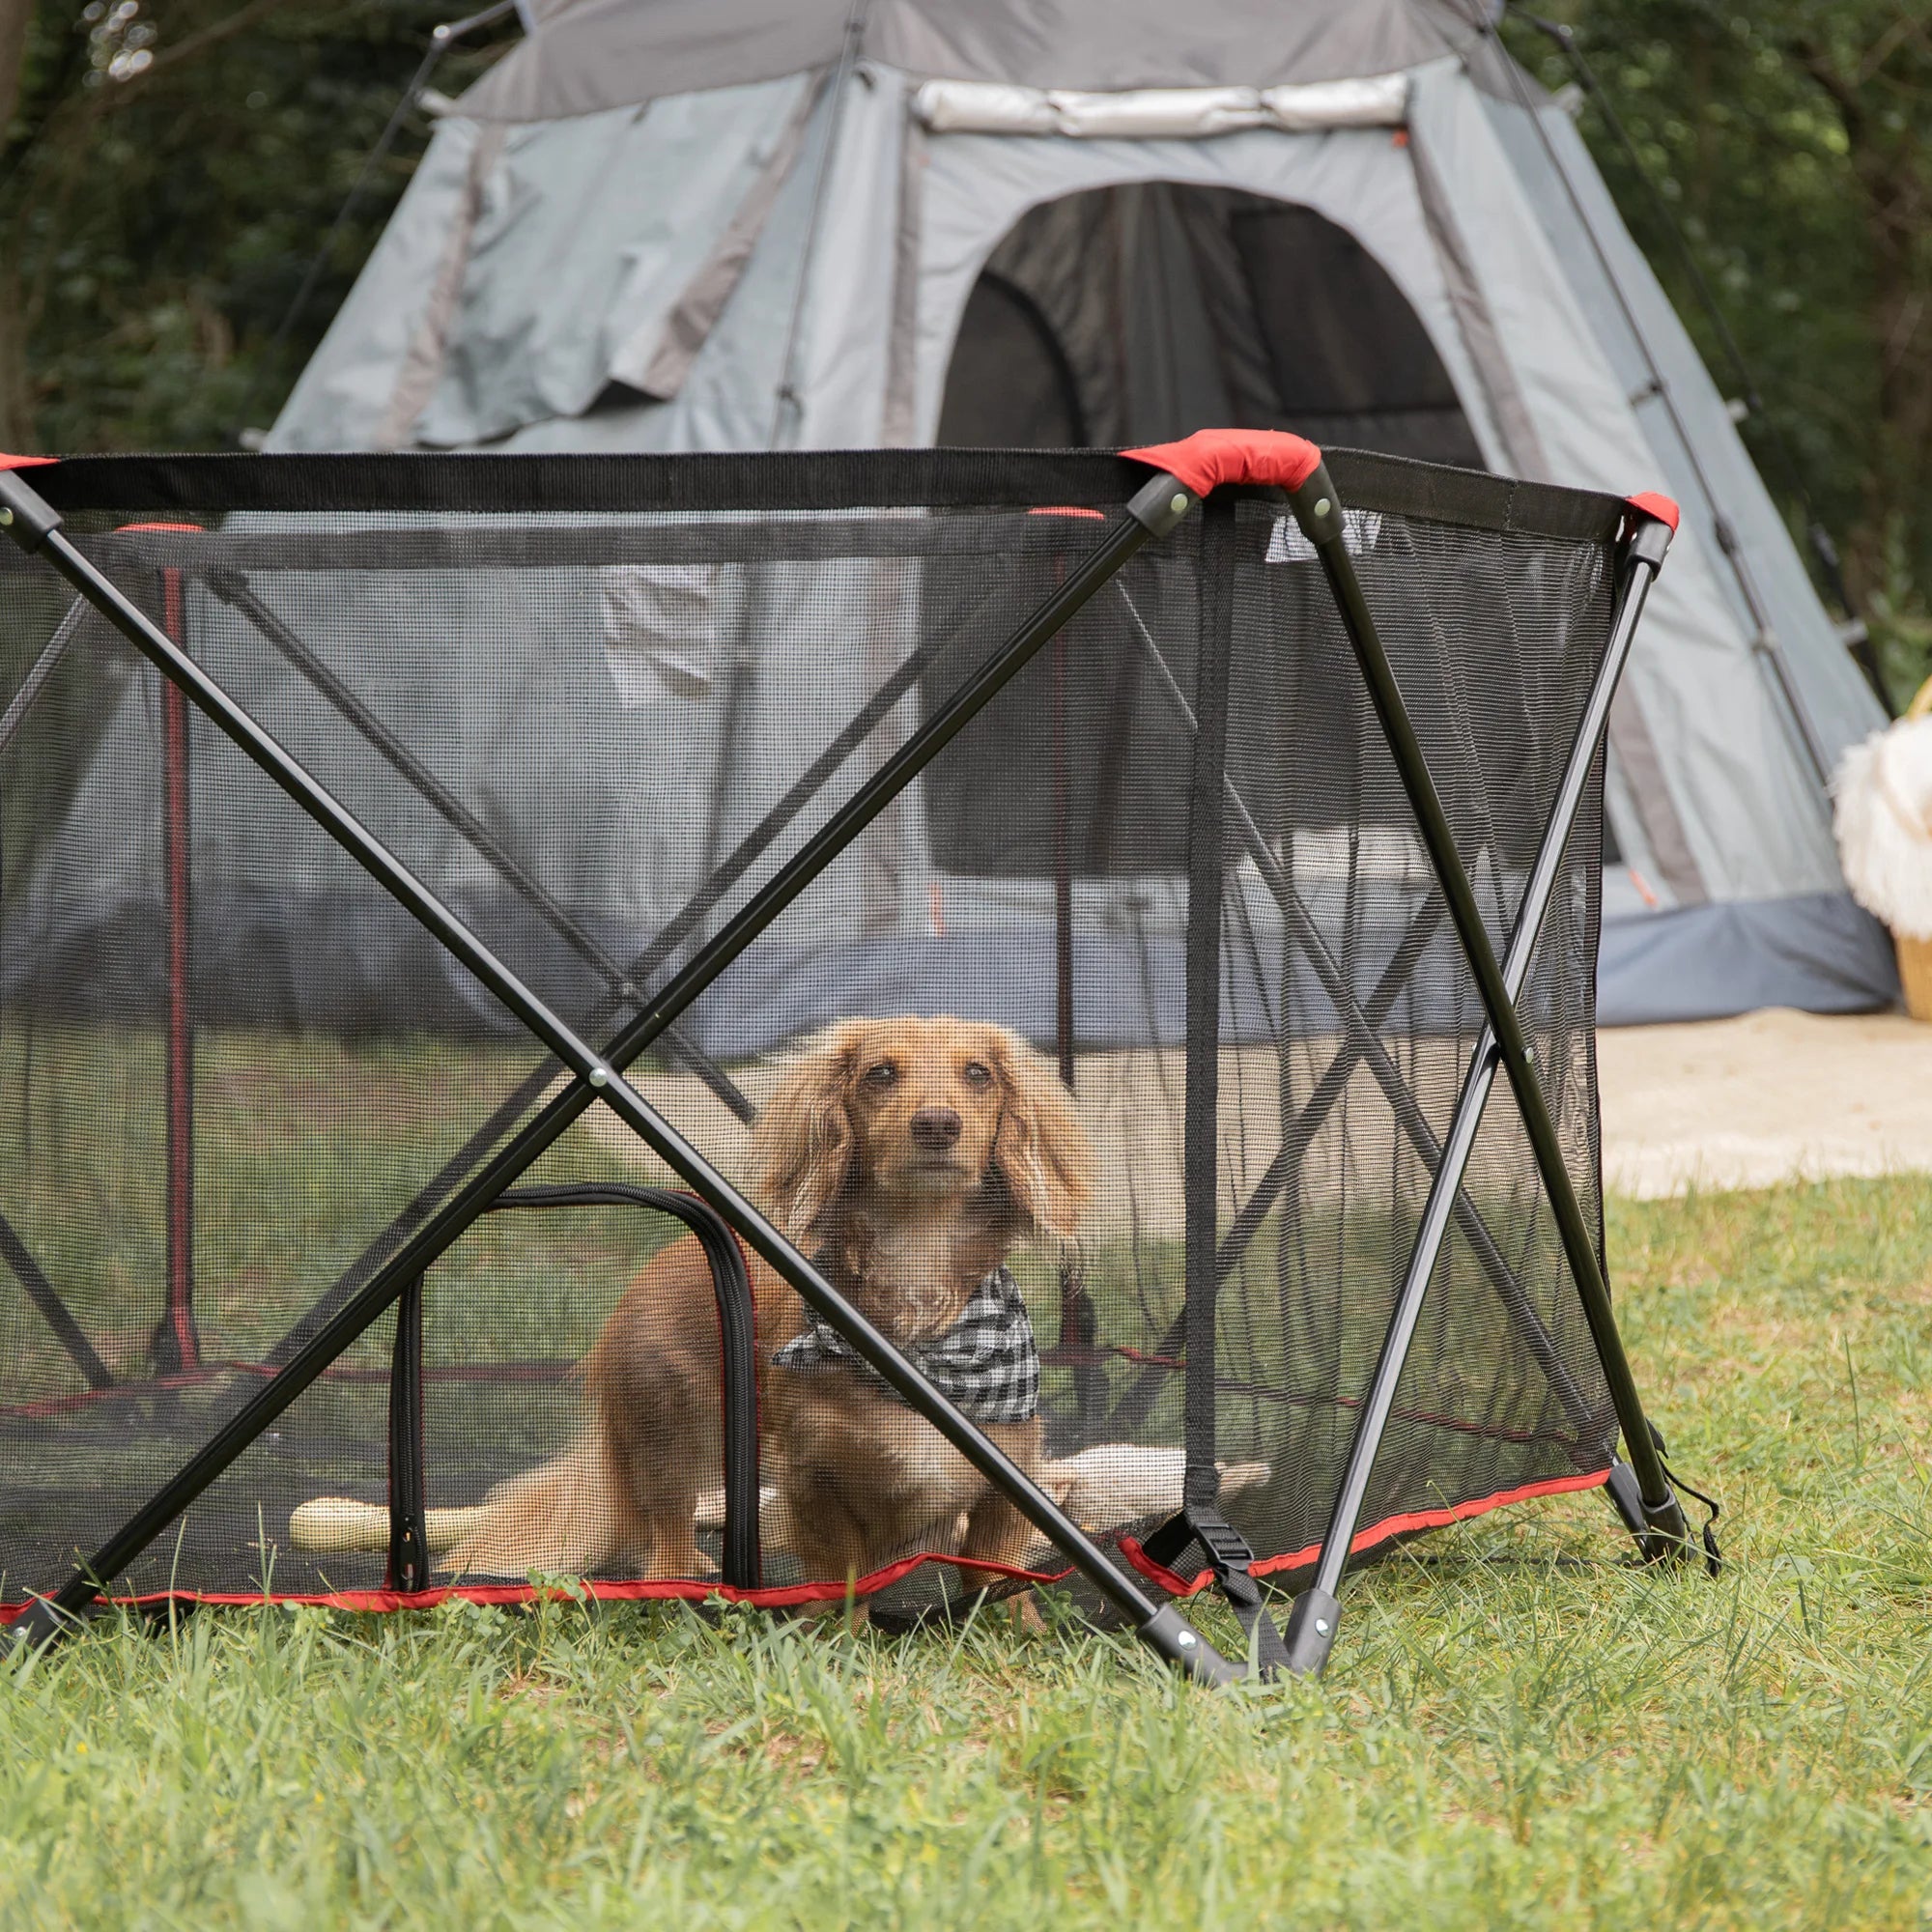 Dog in Portable Pet Pen in front of a tent in the woods.